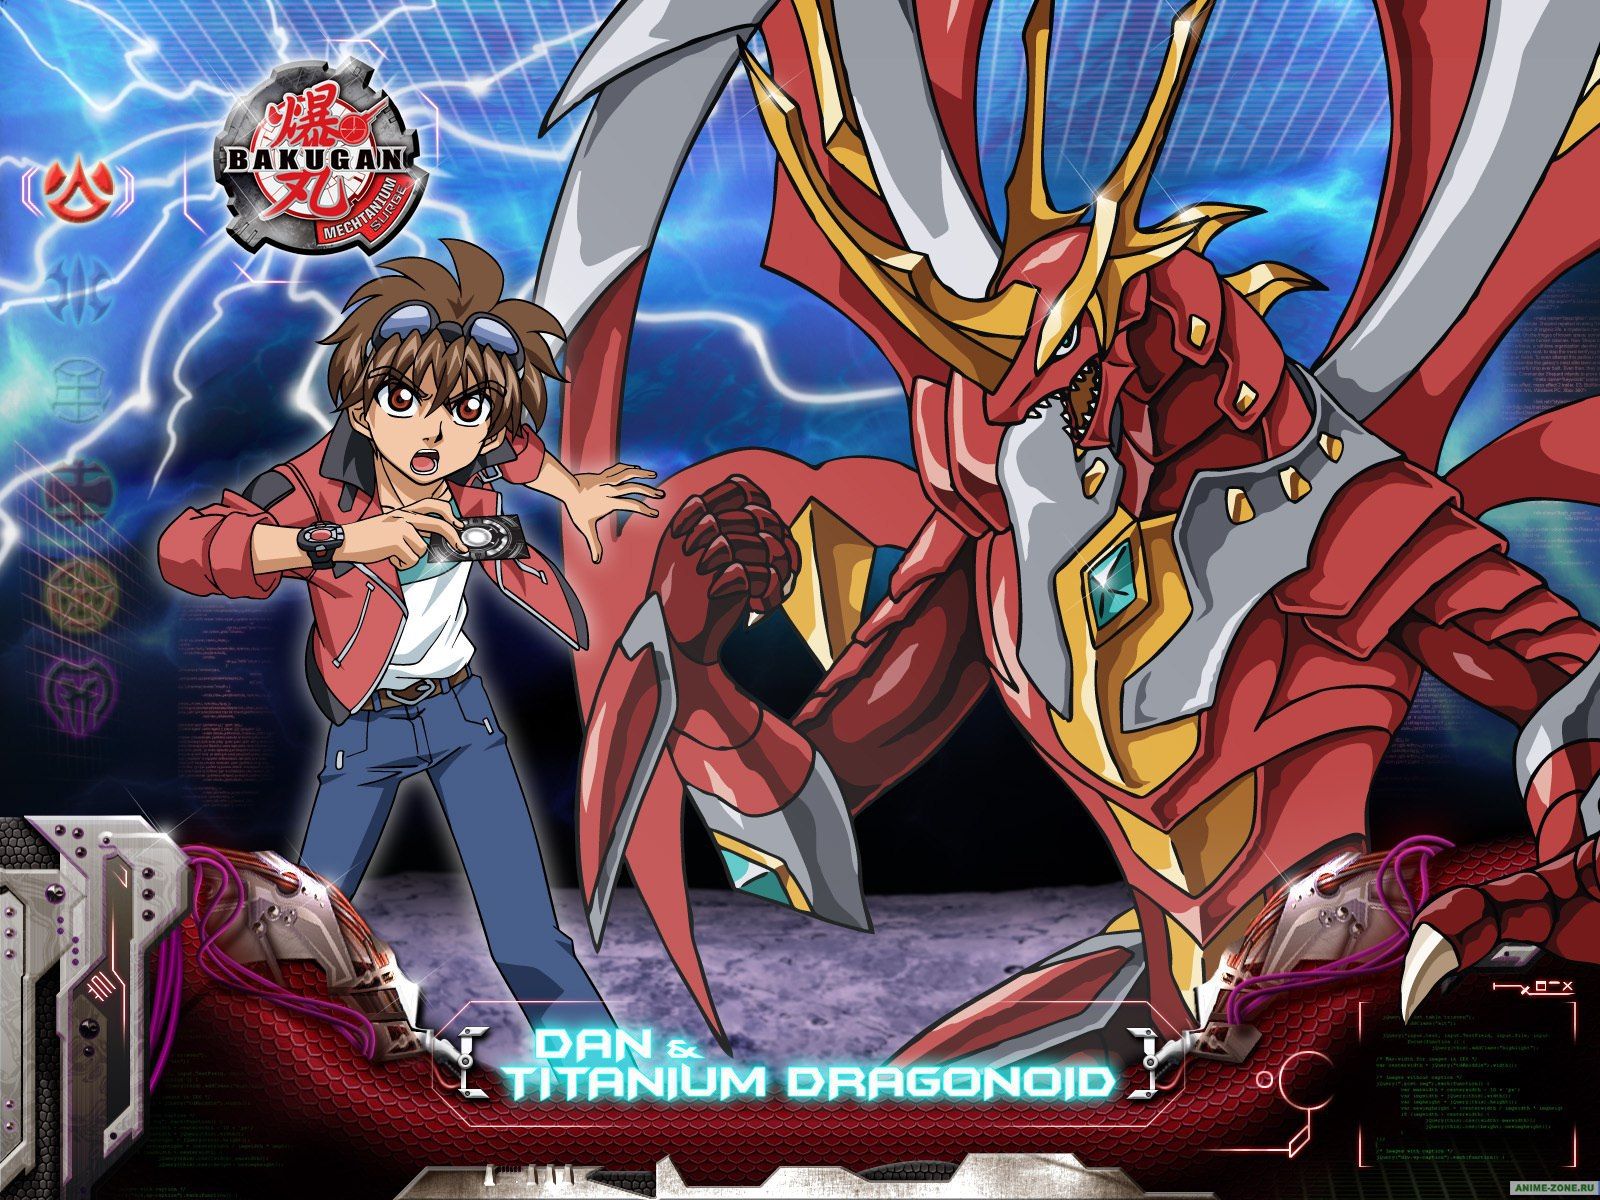 Desperate Bakugan fighters wallpapers and images - wallpapers